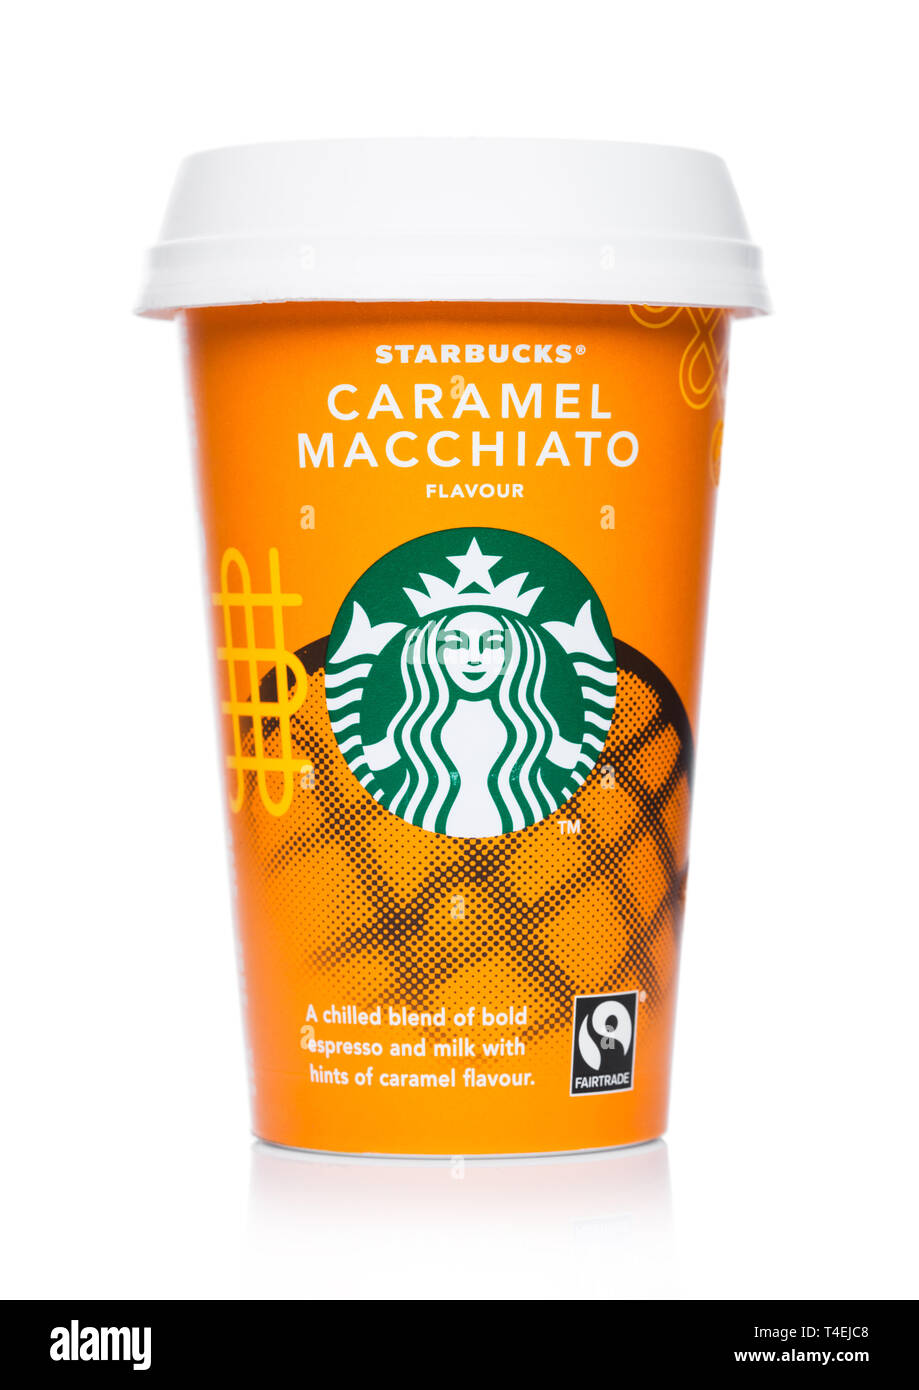 LONDON, UK - APRIL 15, 2019: Paper cup of Starbucks cold coffee with Caramel Macchiato flavour on white. Stock Photo